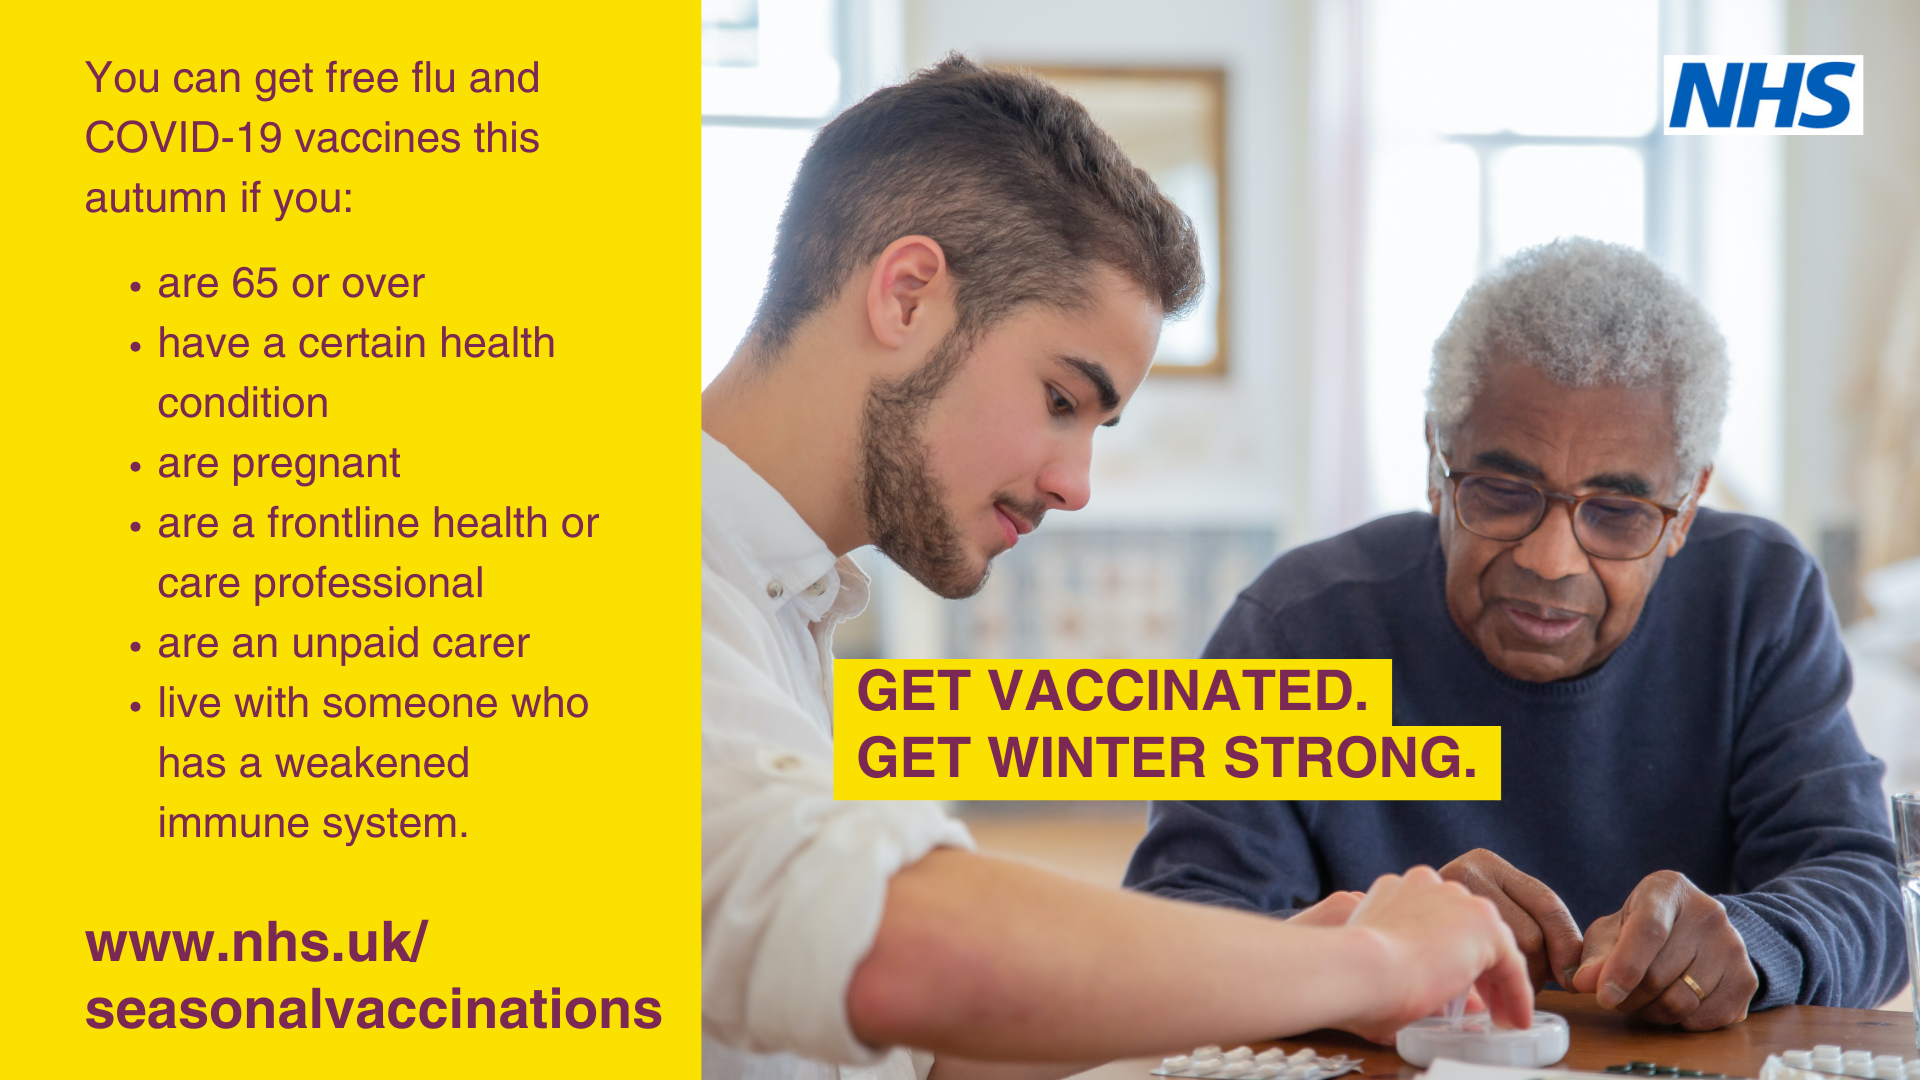 Get Vaccinated this Winter Adult